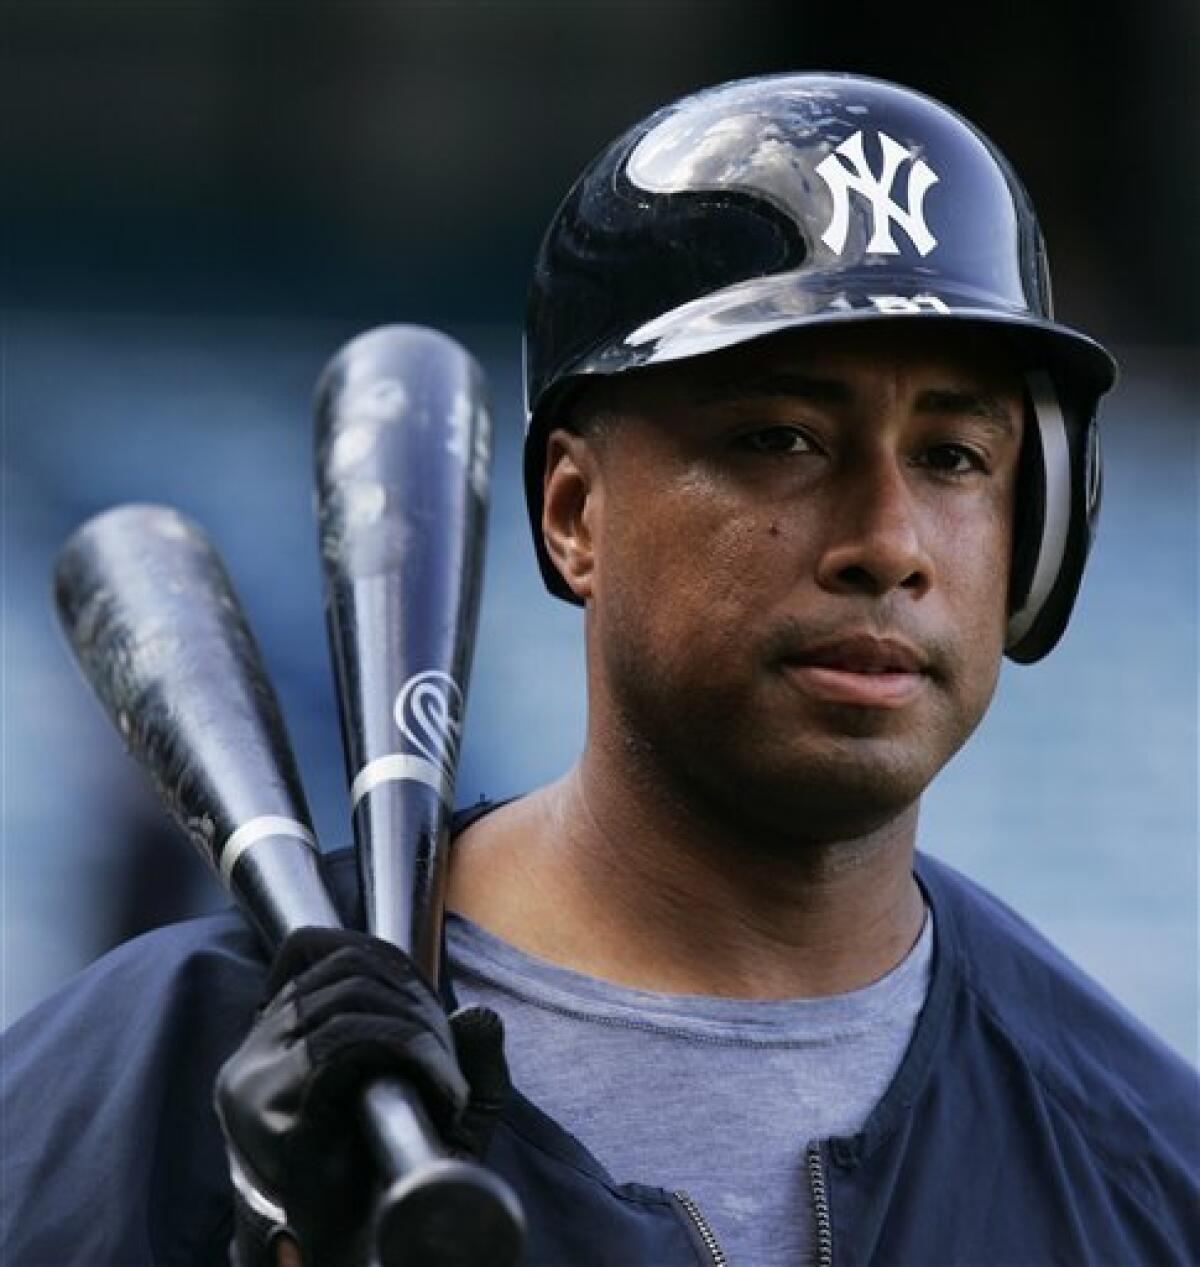 Woman claims Bernie Williams hit her at club - The San Diego Union